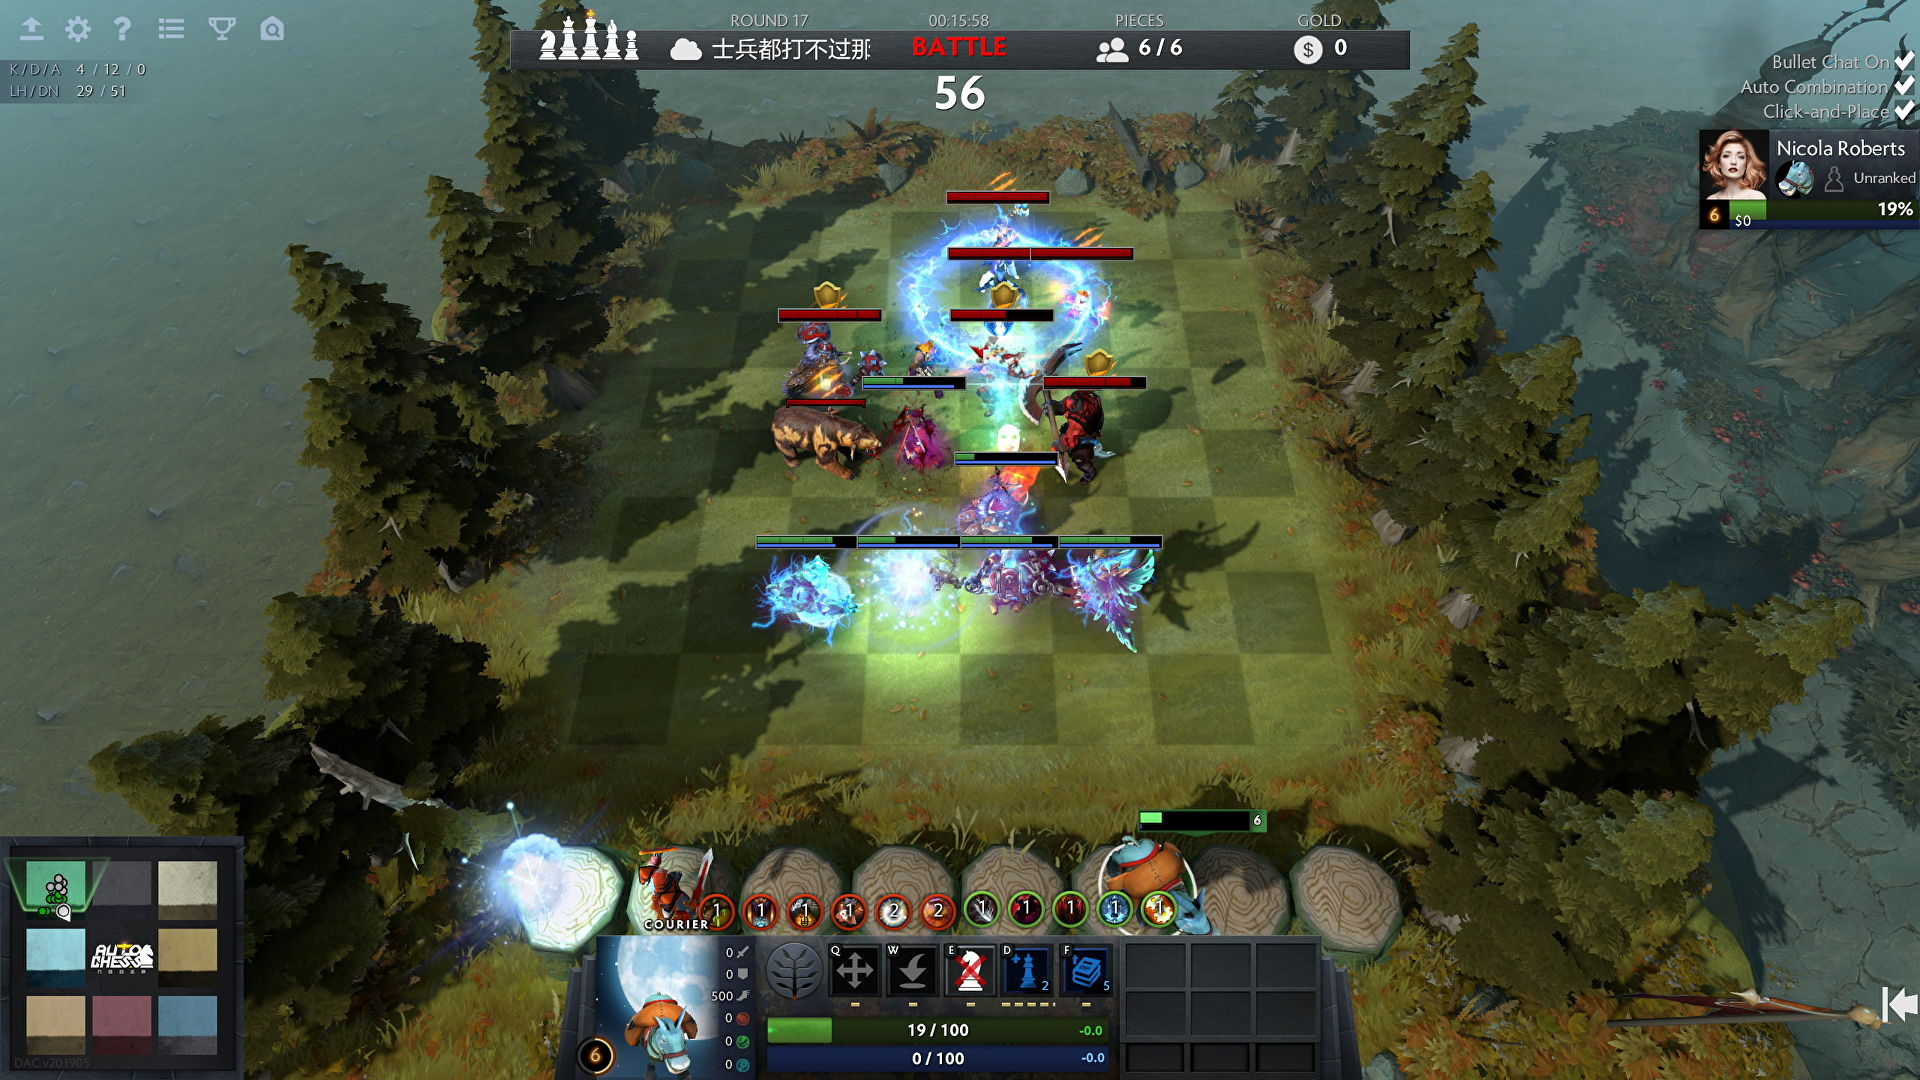 Dota Underlords: Comparison with Auto Chess and Teamfight Tactics